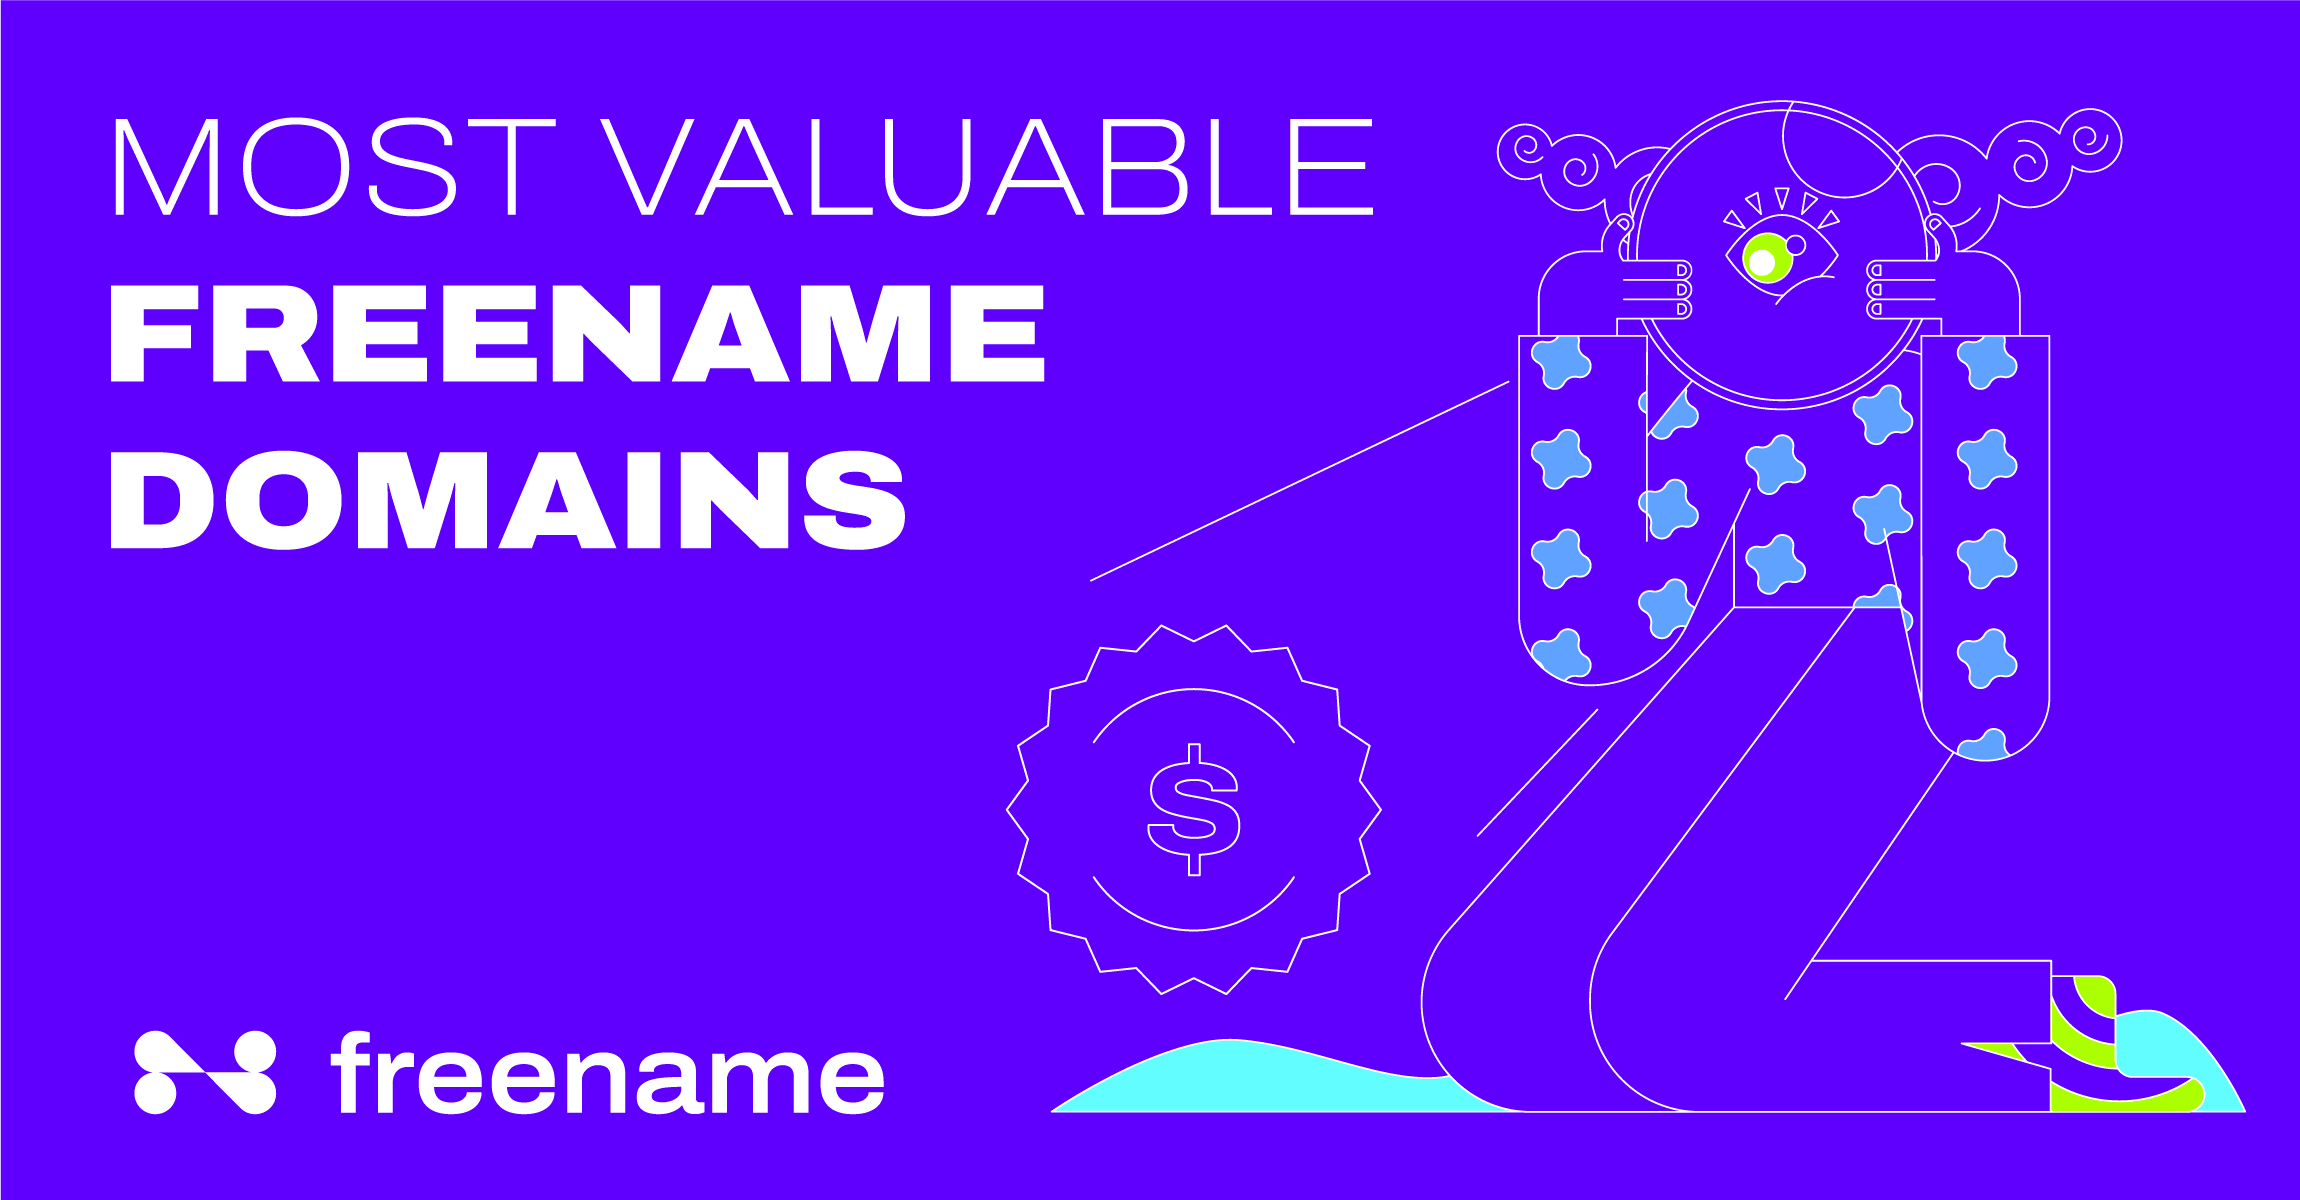 Most Valuable Freename Domains